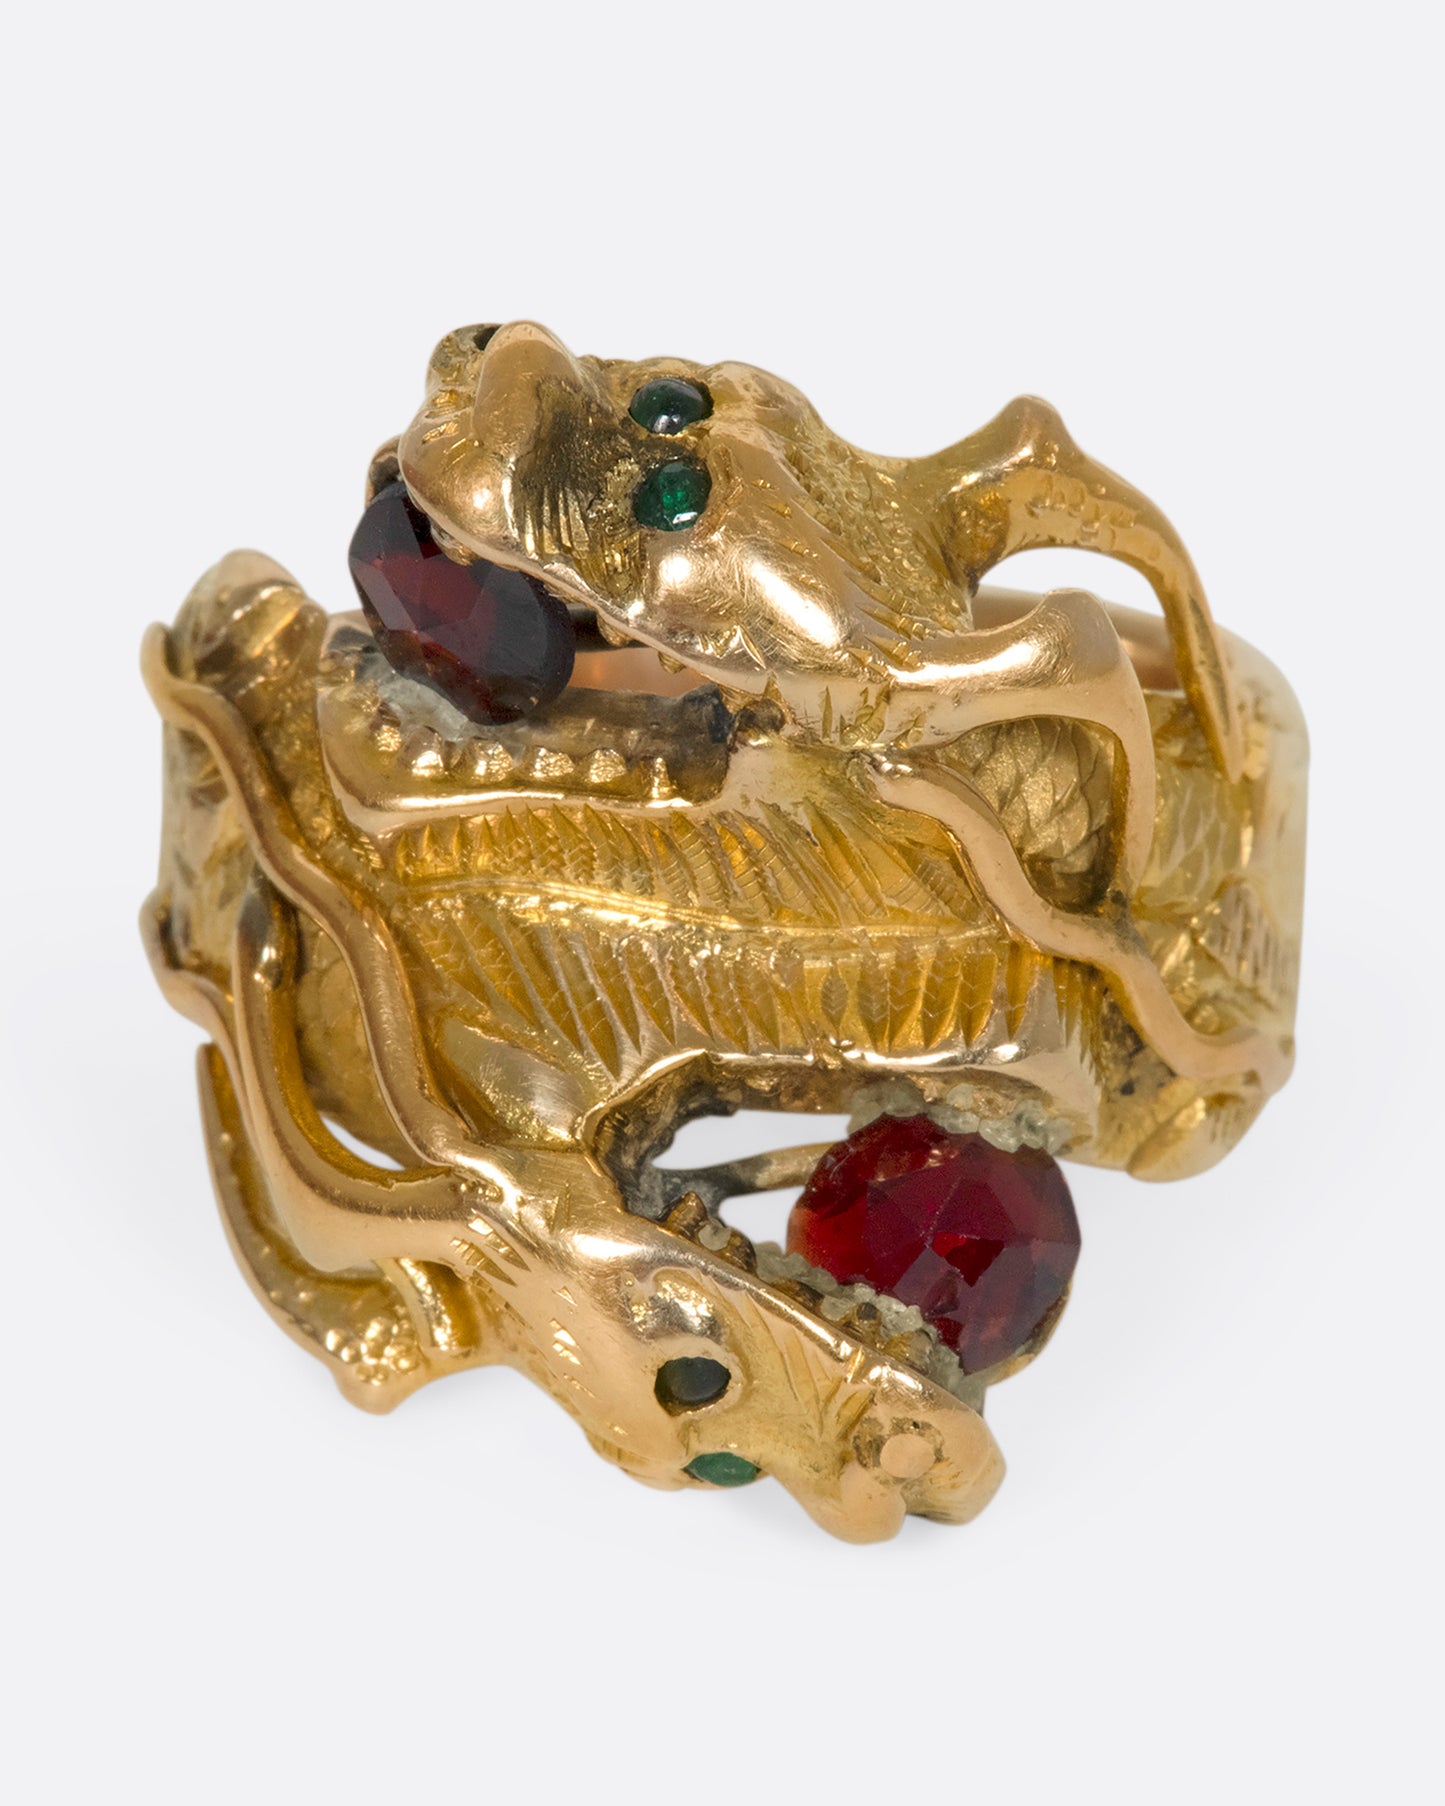 A slightly off center view of a yellow gold ring with two wrapped dragons, each with emerald eyes and garnets in their mouths.